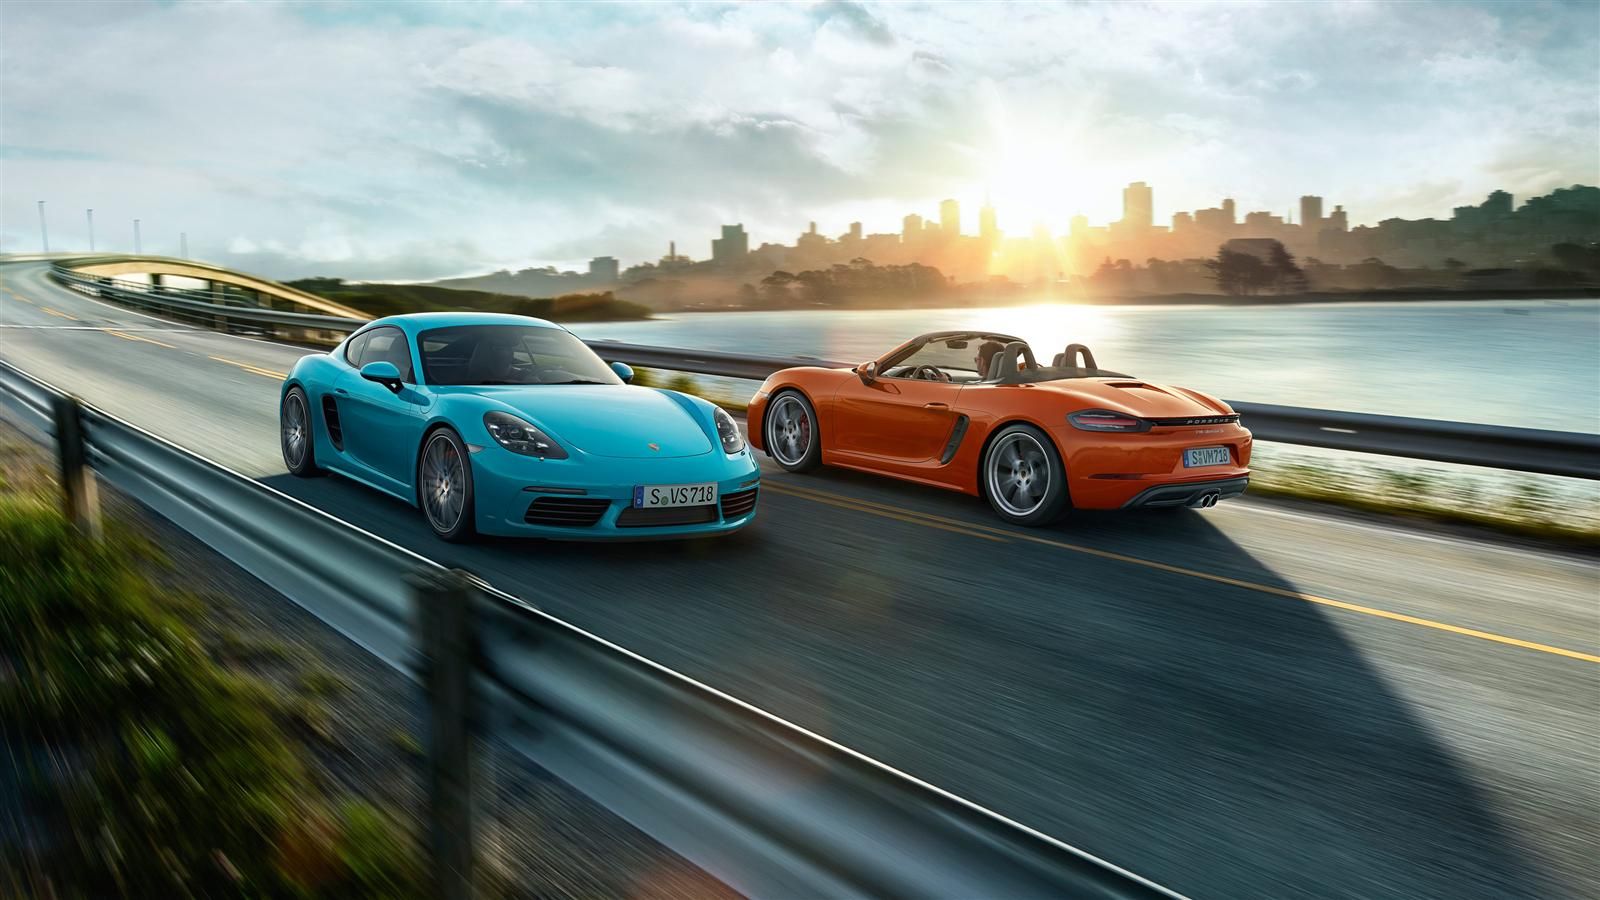 2022 The Fate of the Porsche 718 Draws Near As Porsche’s Decision Makers Weigh Options